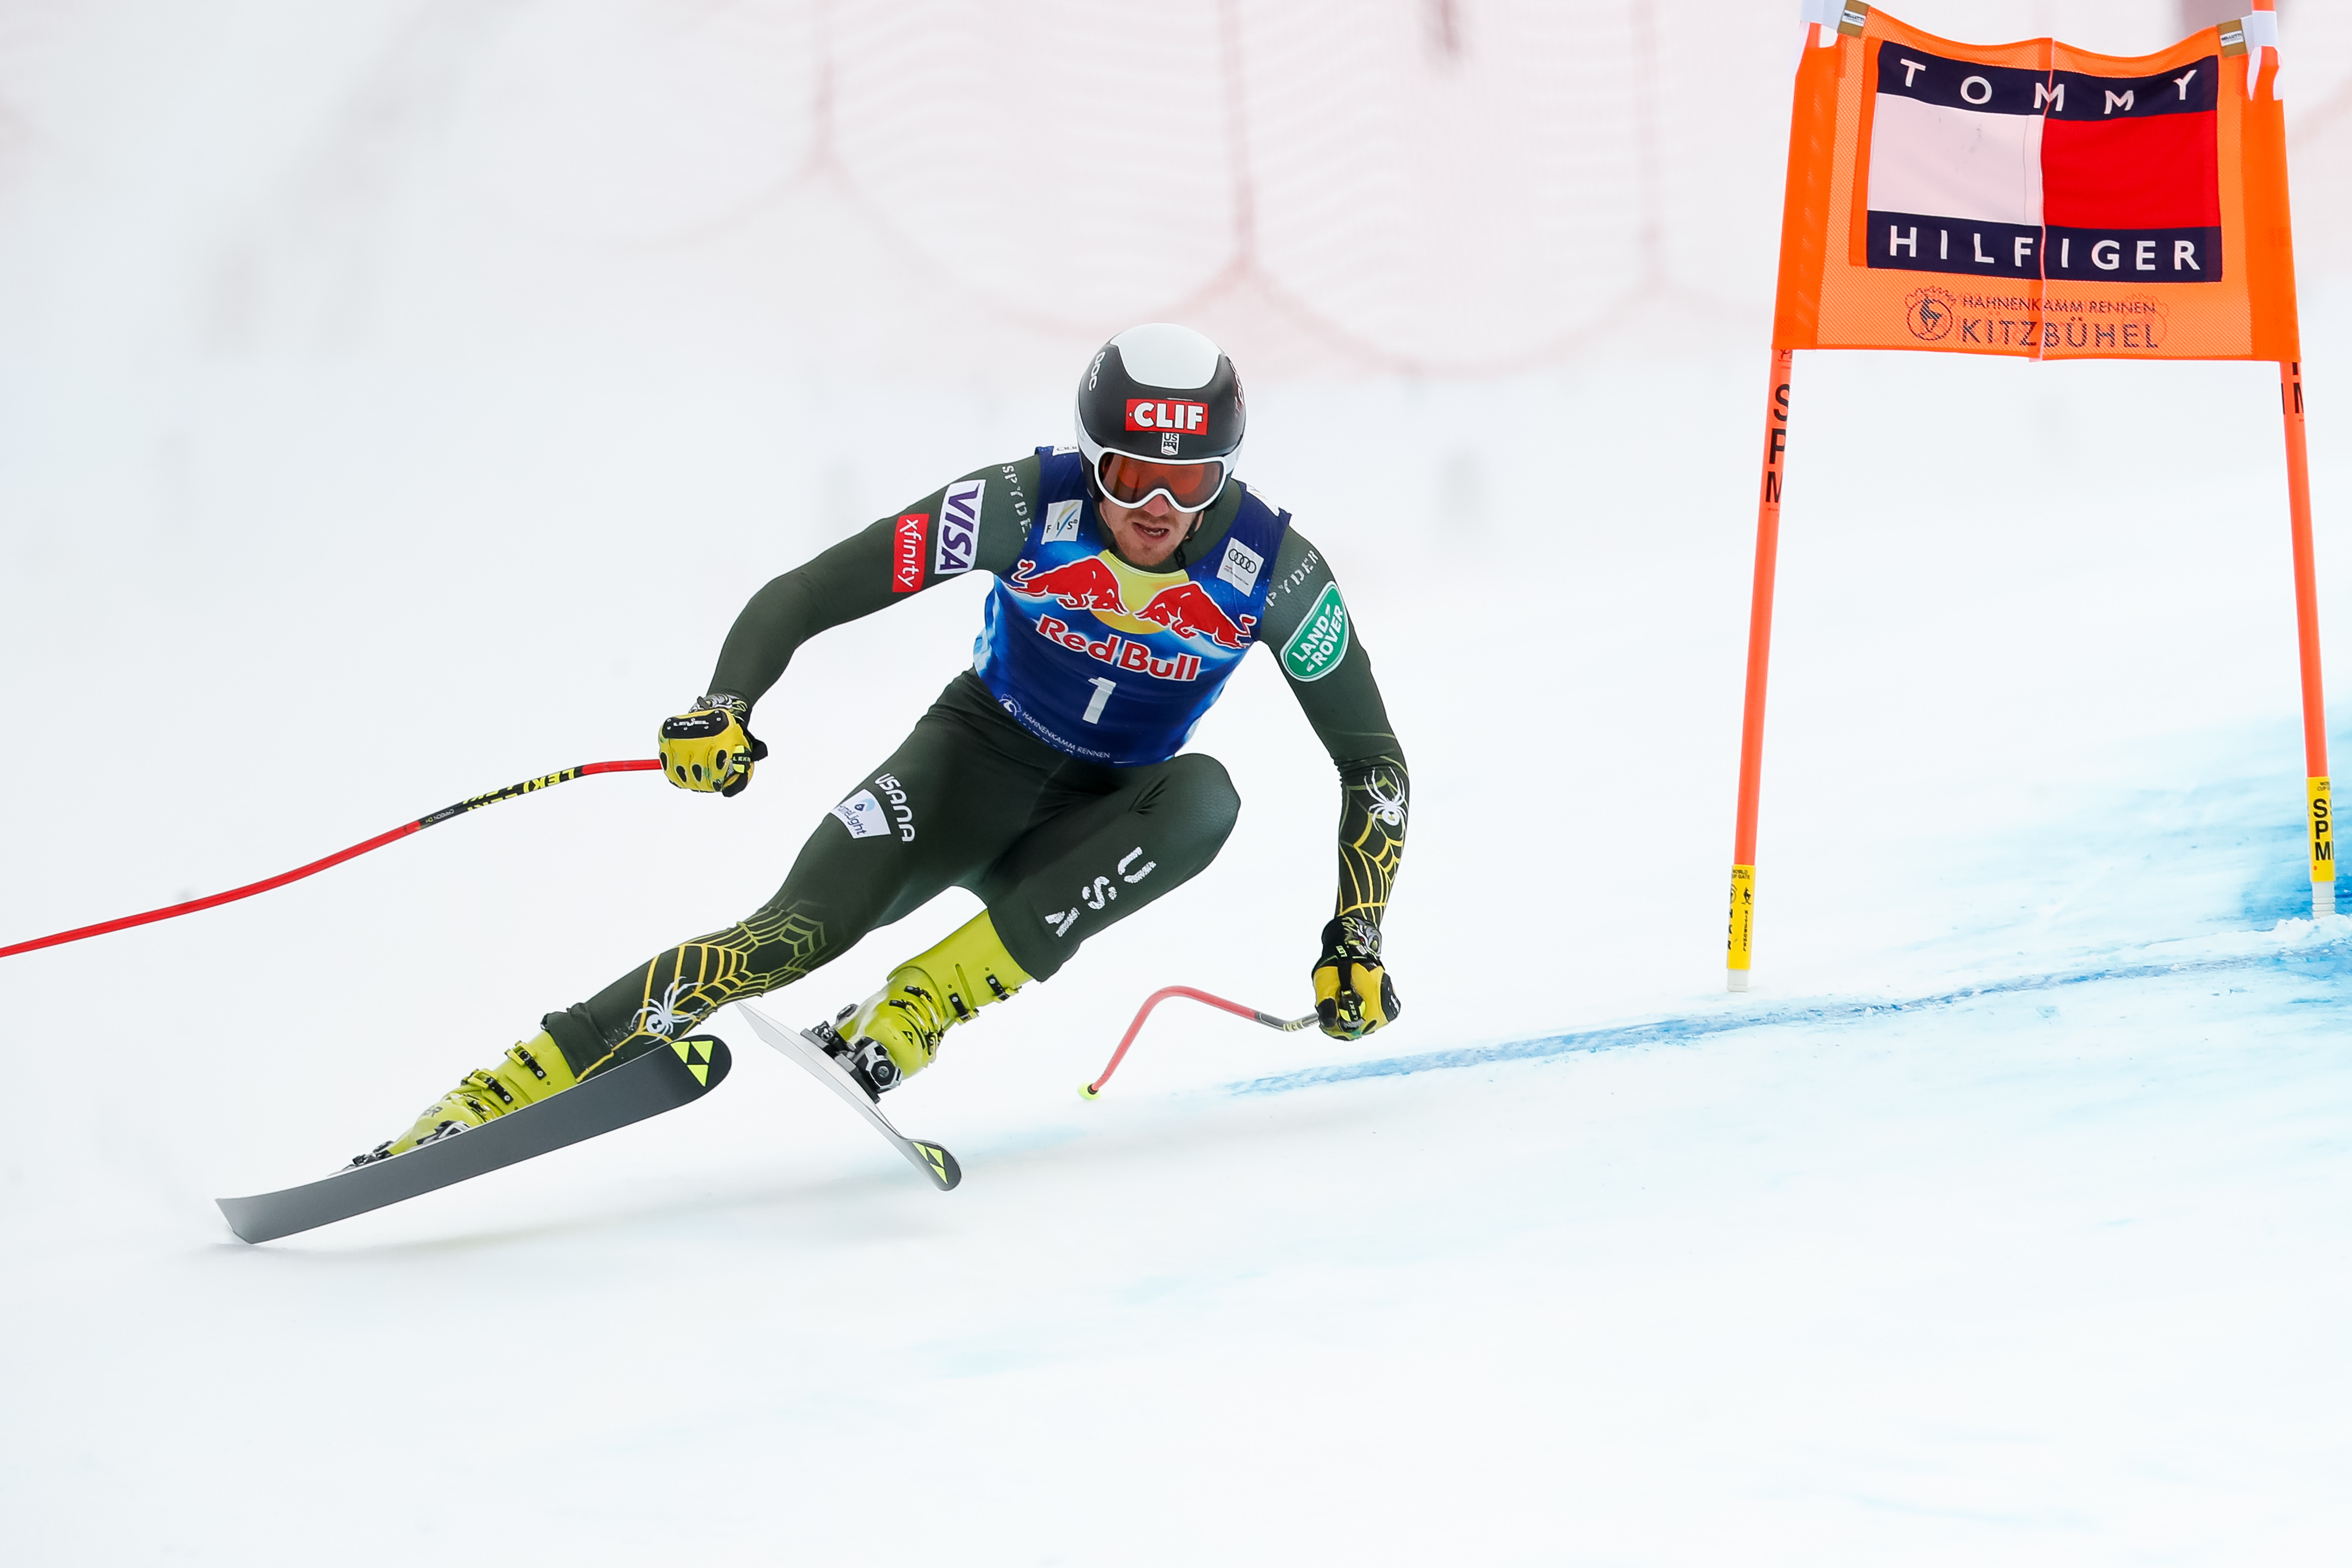 Bennett Takes Another Top Result at Kitzbuehel Downhill